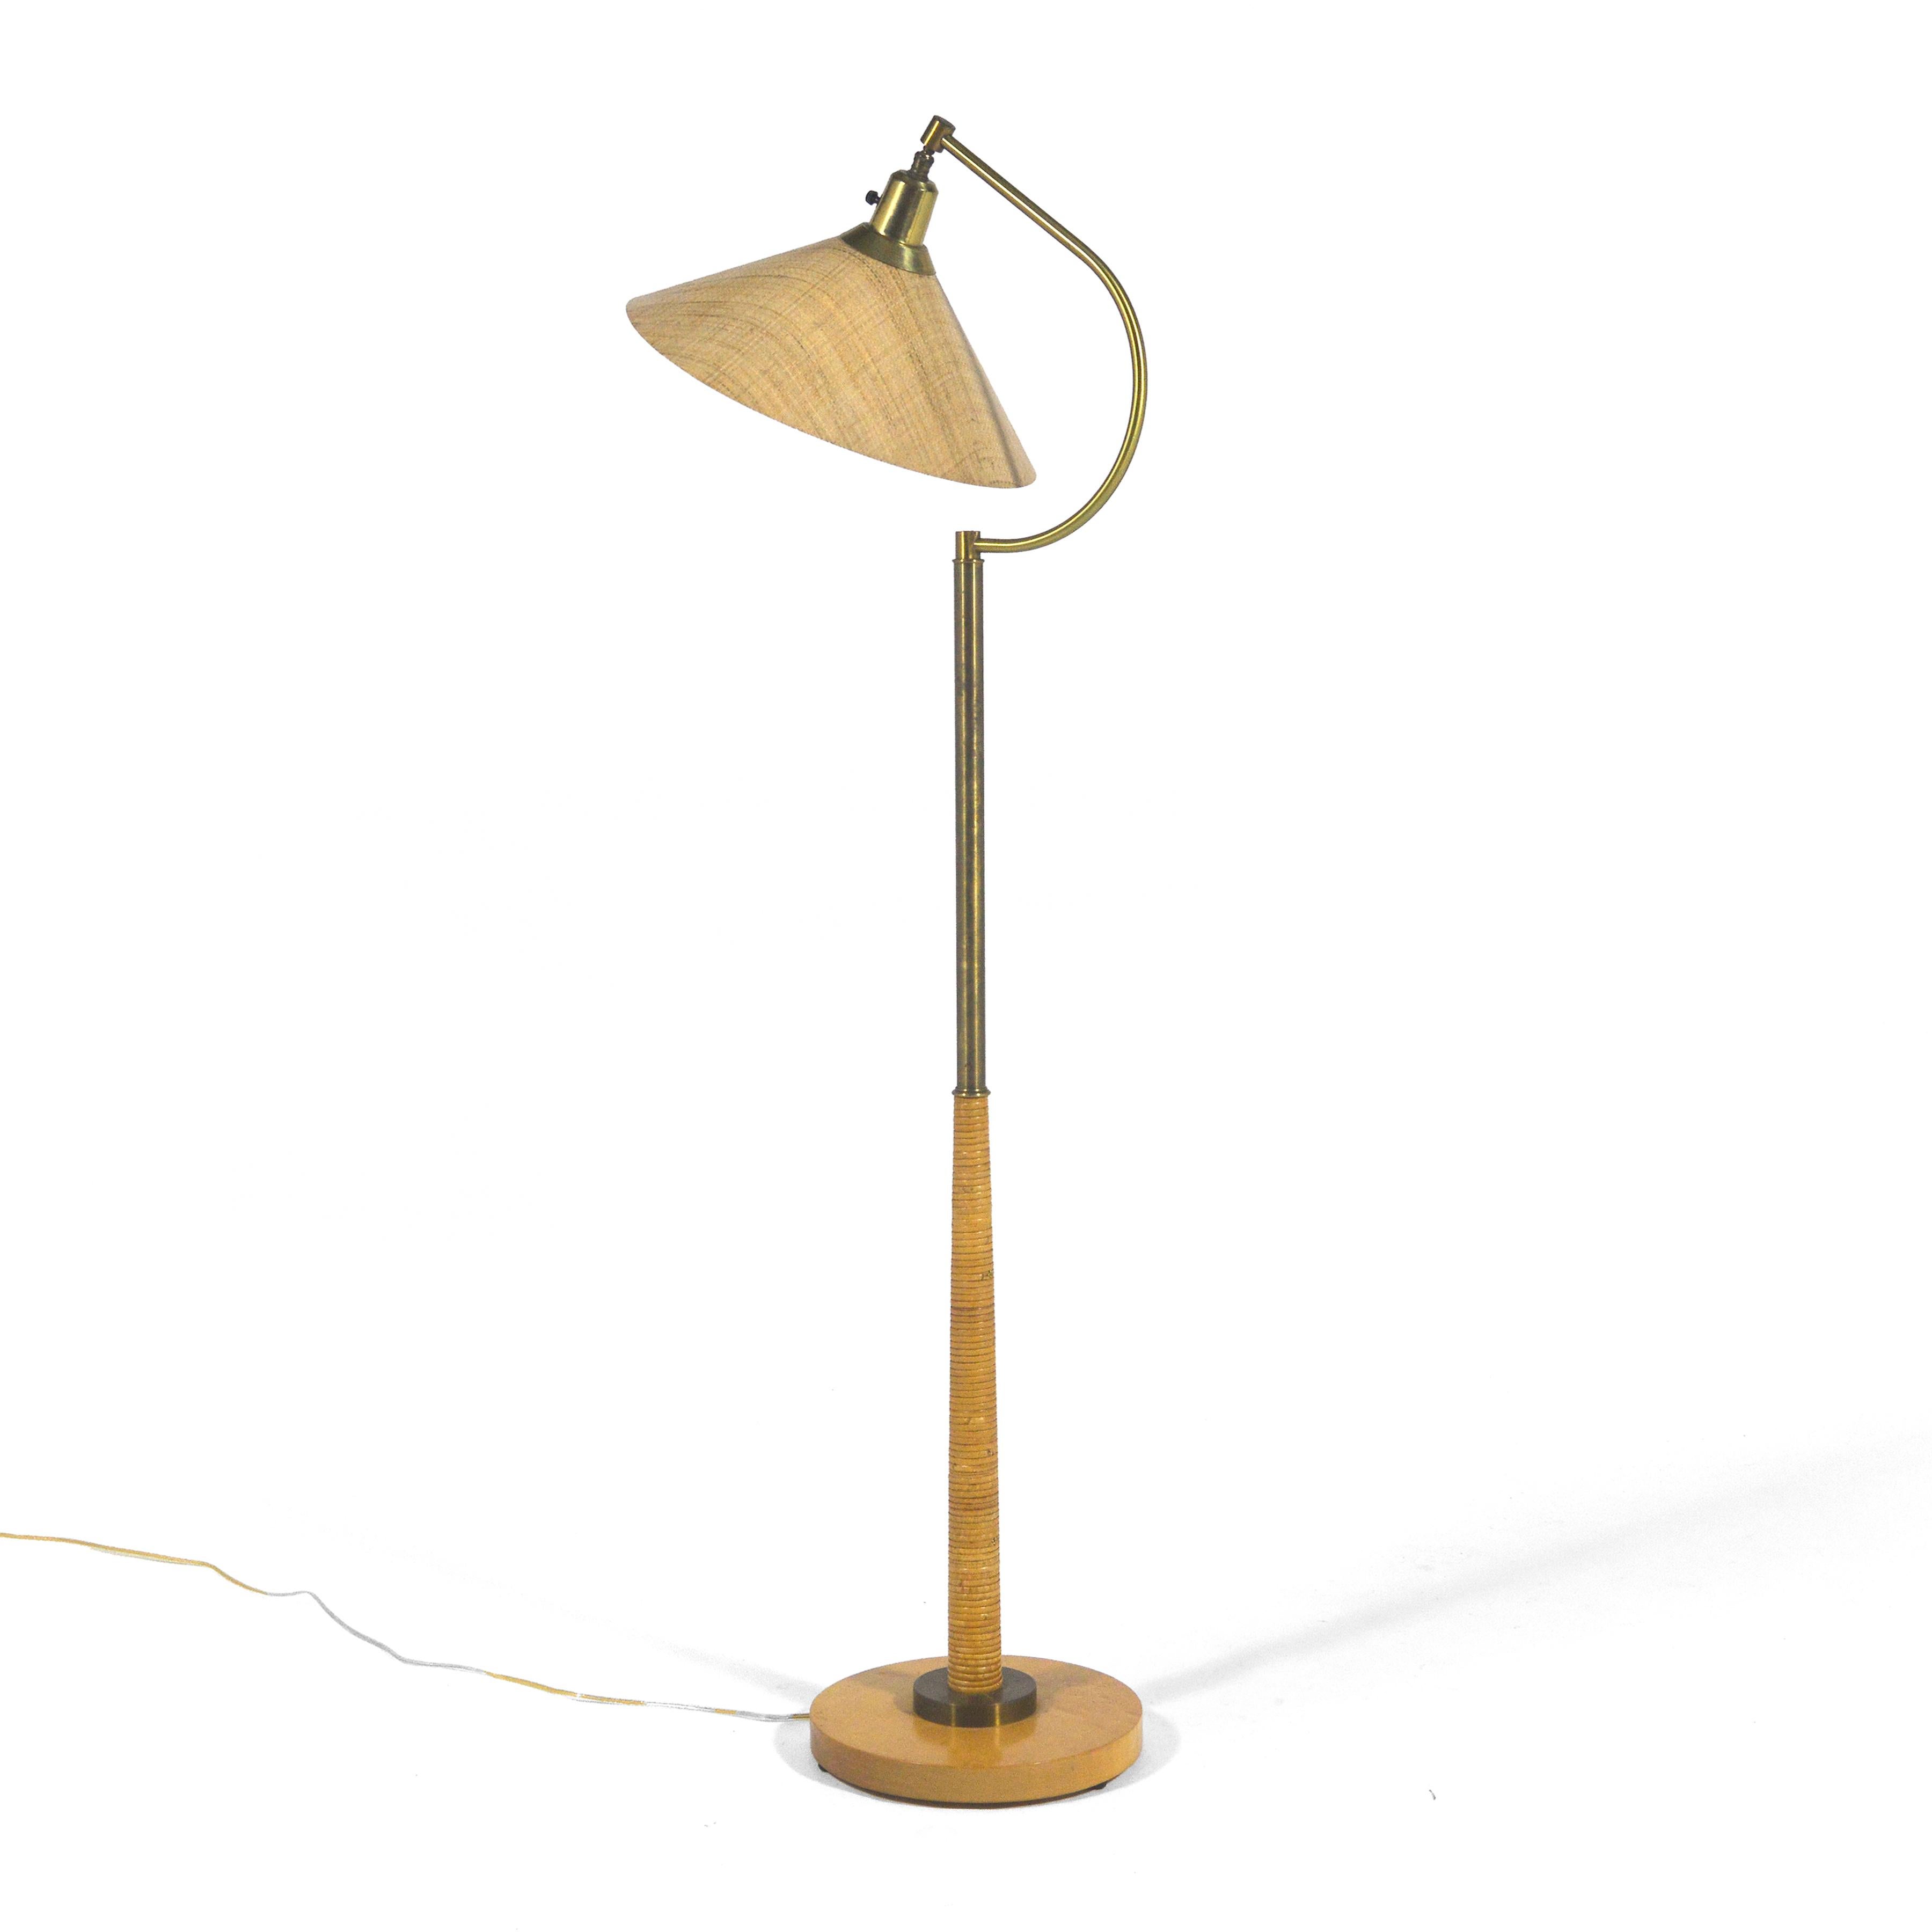 This lovely lamp executed in brass with several delightful design details including the wood base, the cane wrapped column, and the rafia-ware style shade.

Offering both directional and ambient lighting, the lamp has a sculptural presence while